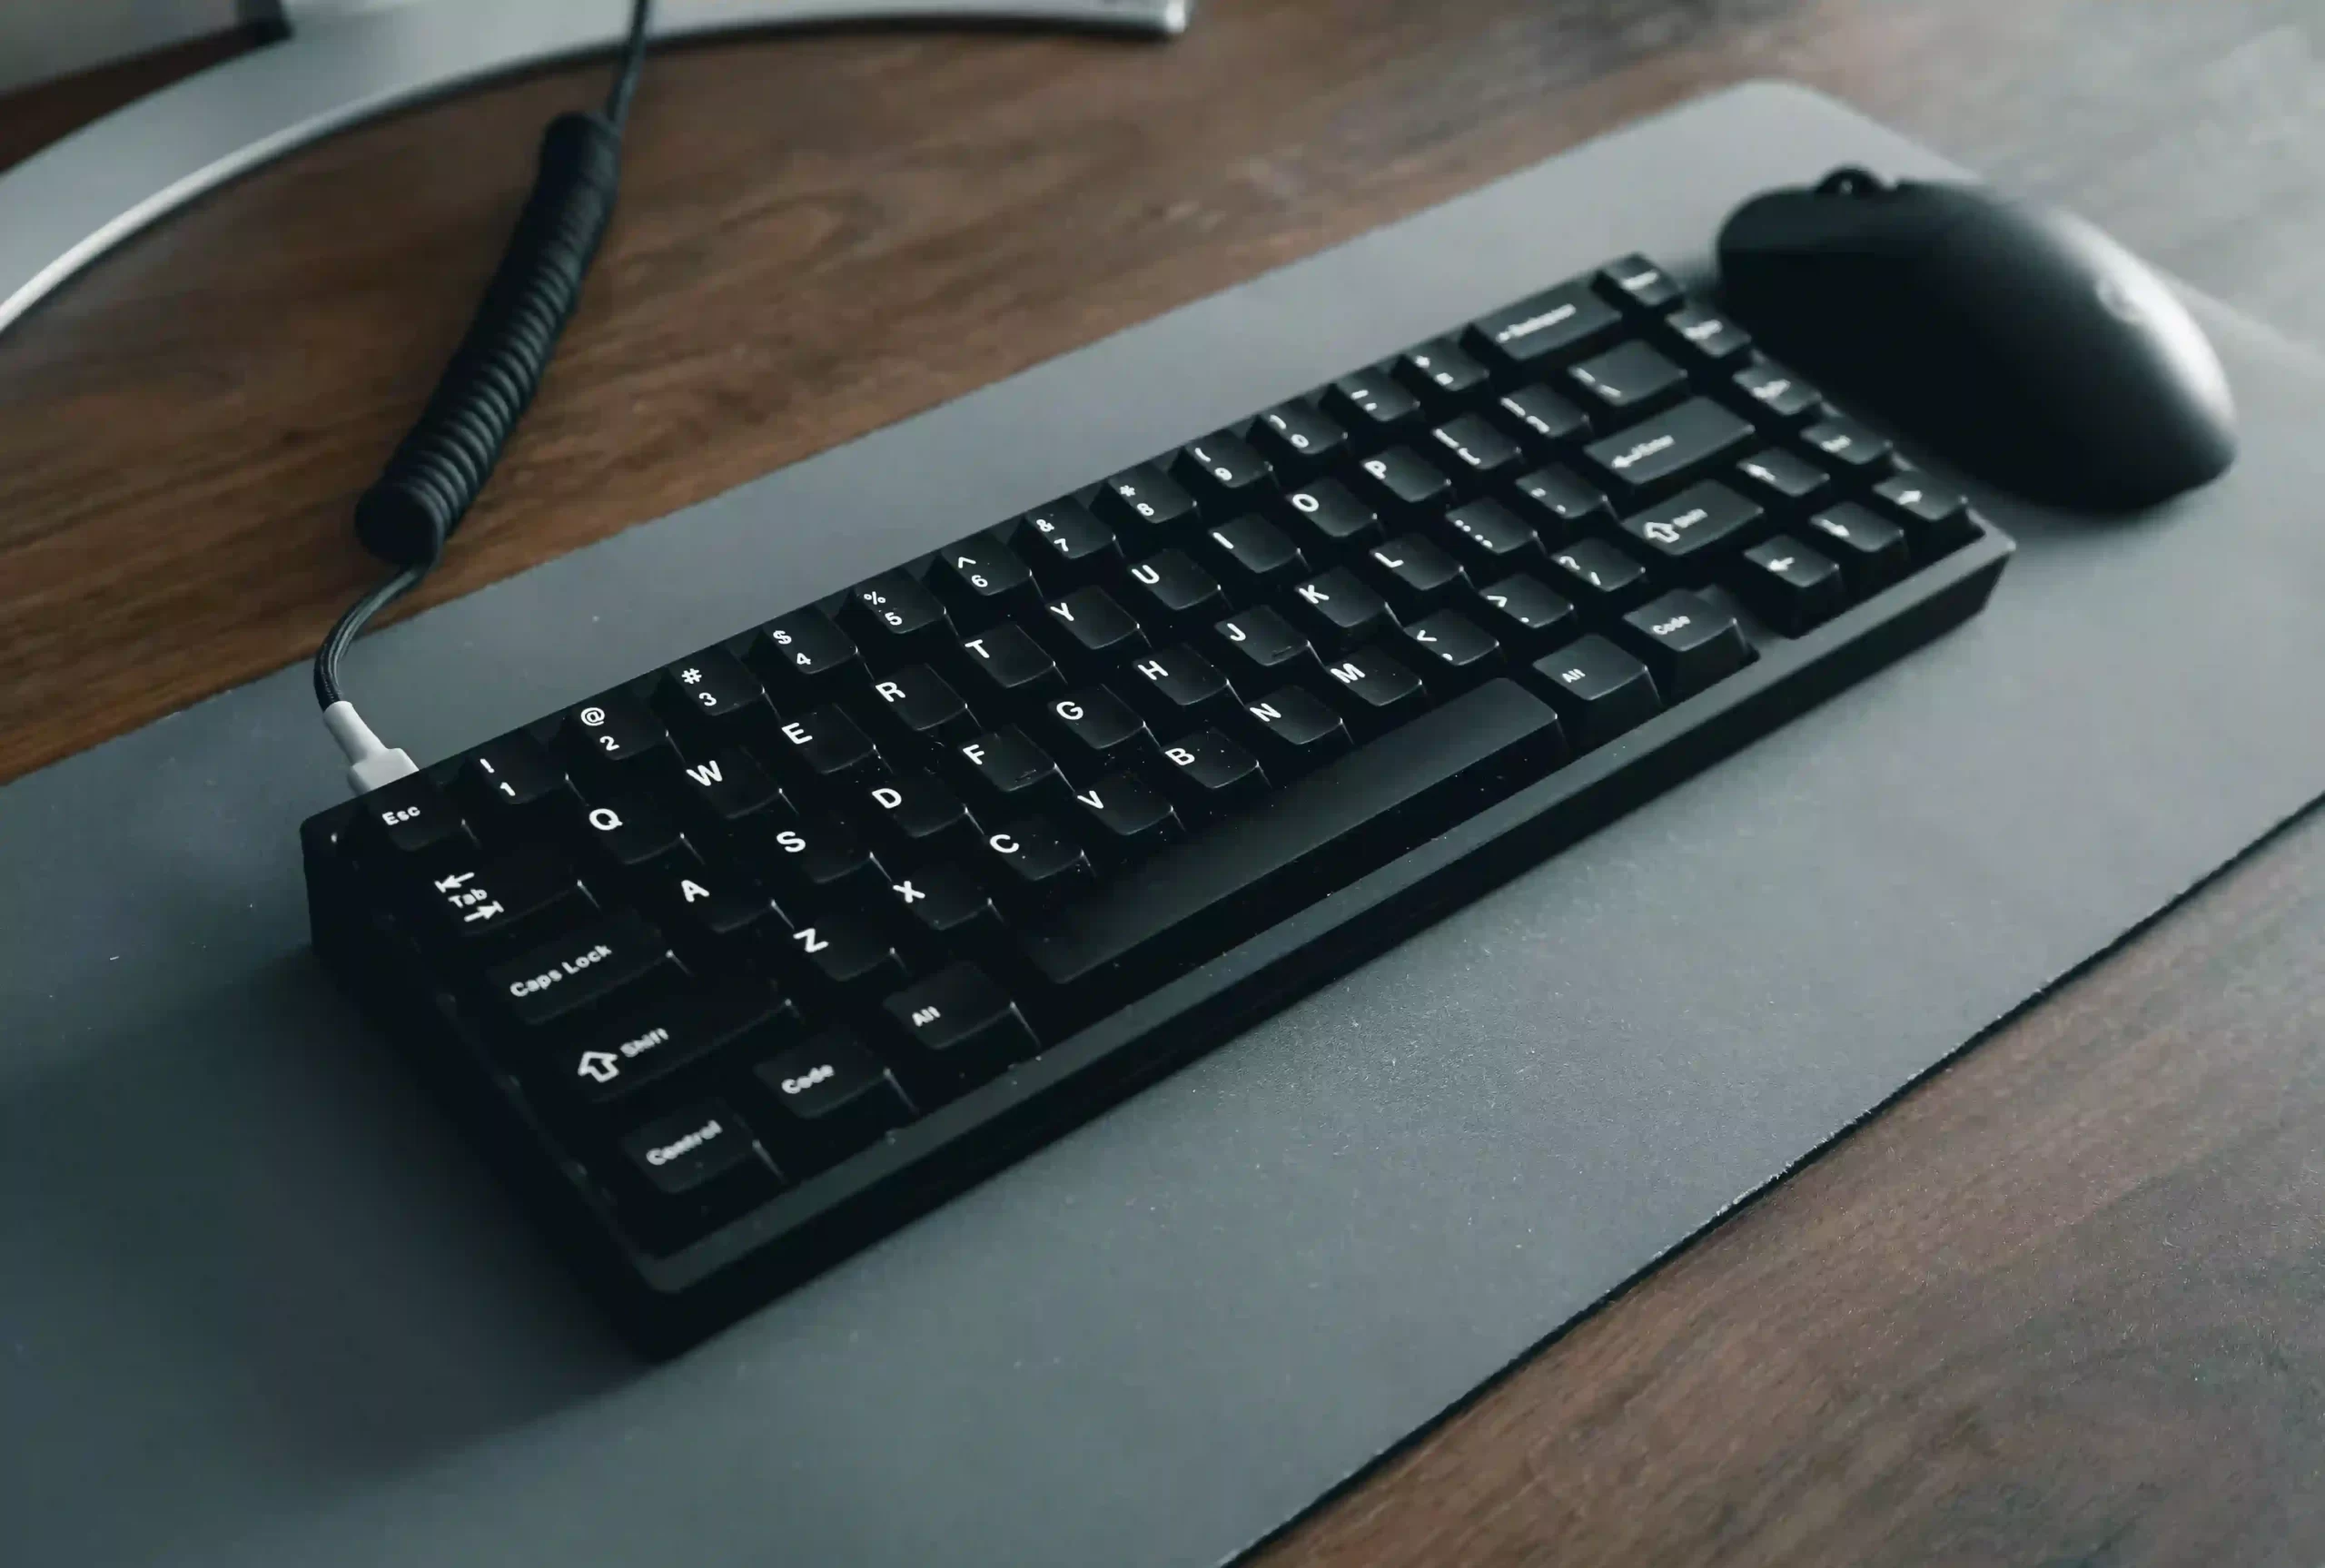 "Using a Keyboard and Mouse" for Toshiba TV